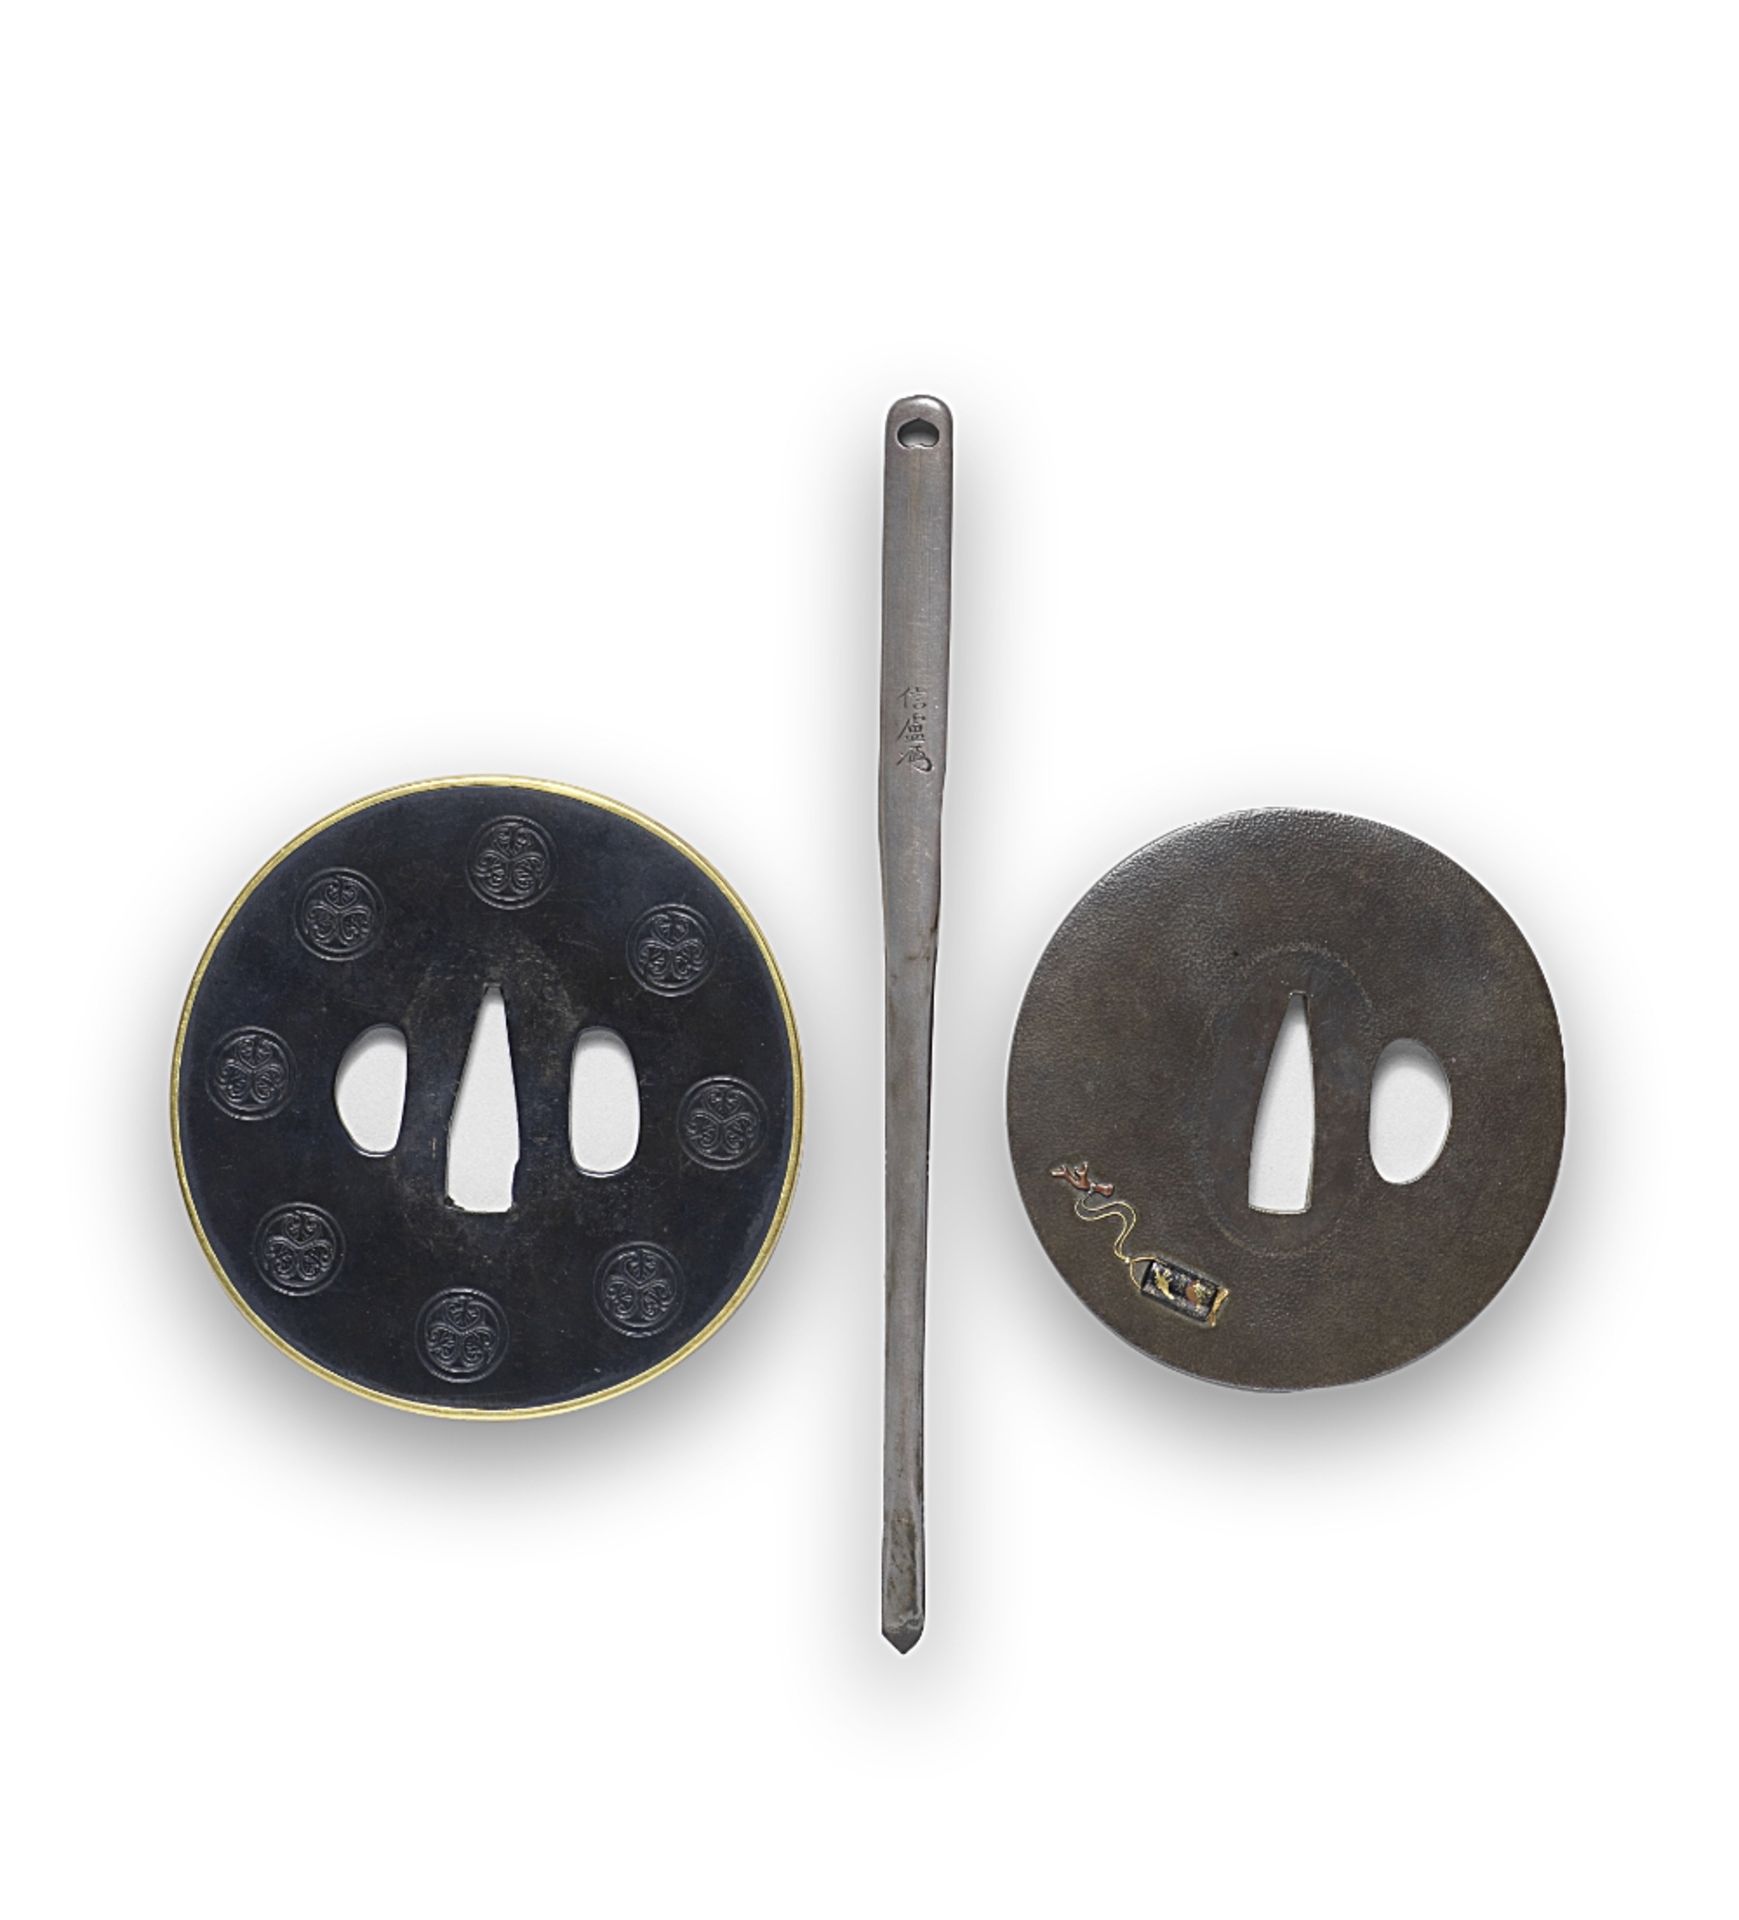 TWO TSUBA (HAND GUARDS) AND A KOGAI (SKEWER) Edo period (1615-1868), early/mid-19th century (3) - Image 2 of 2